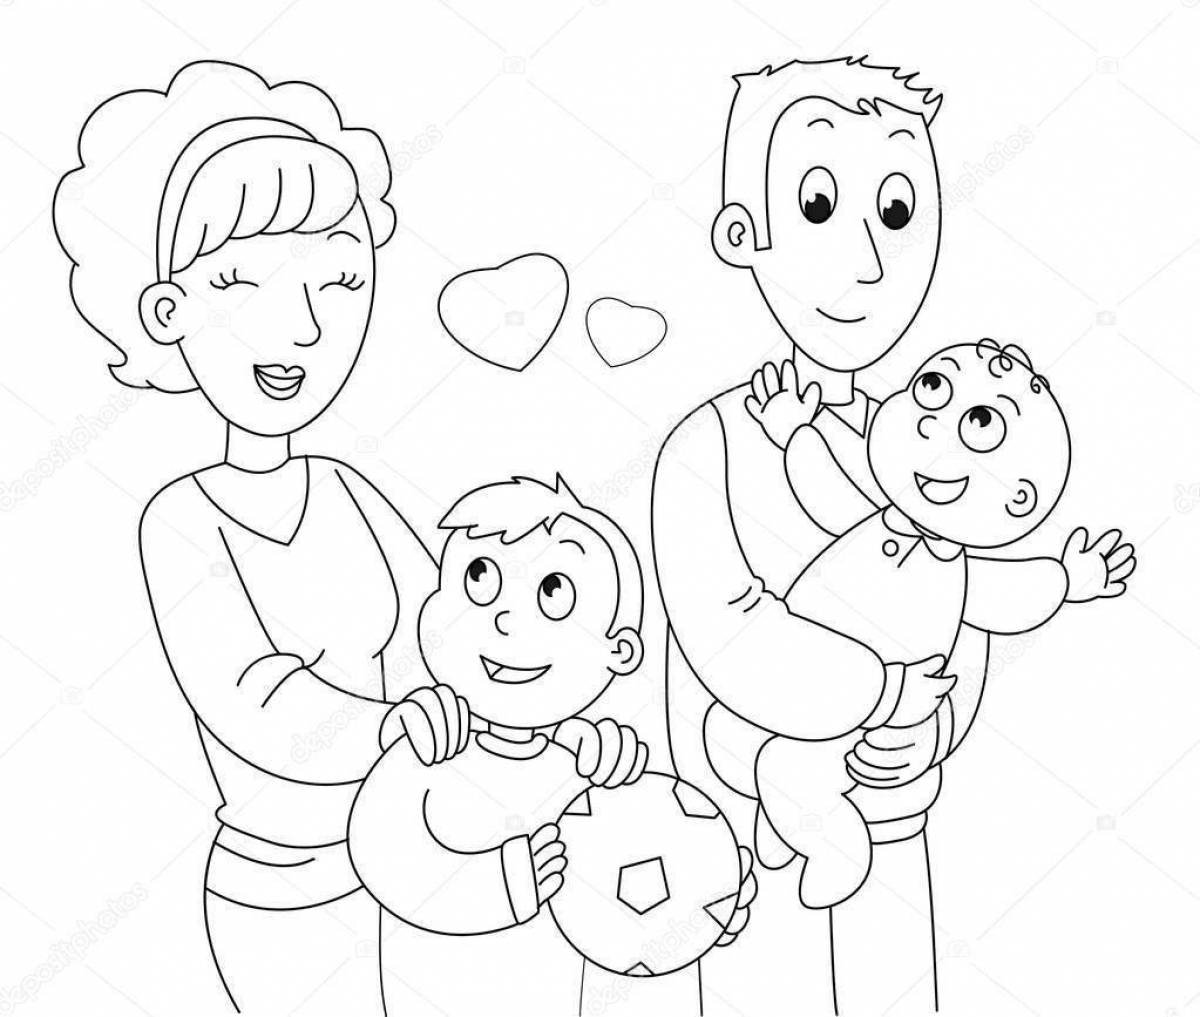 Coloring pages for dad and daughter